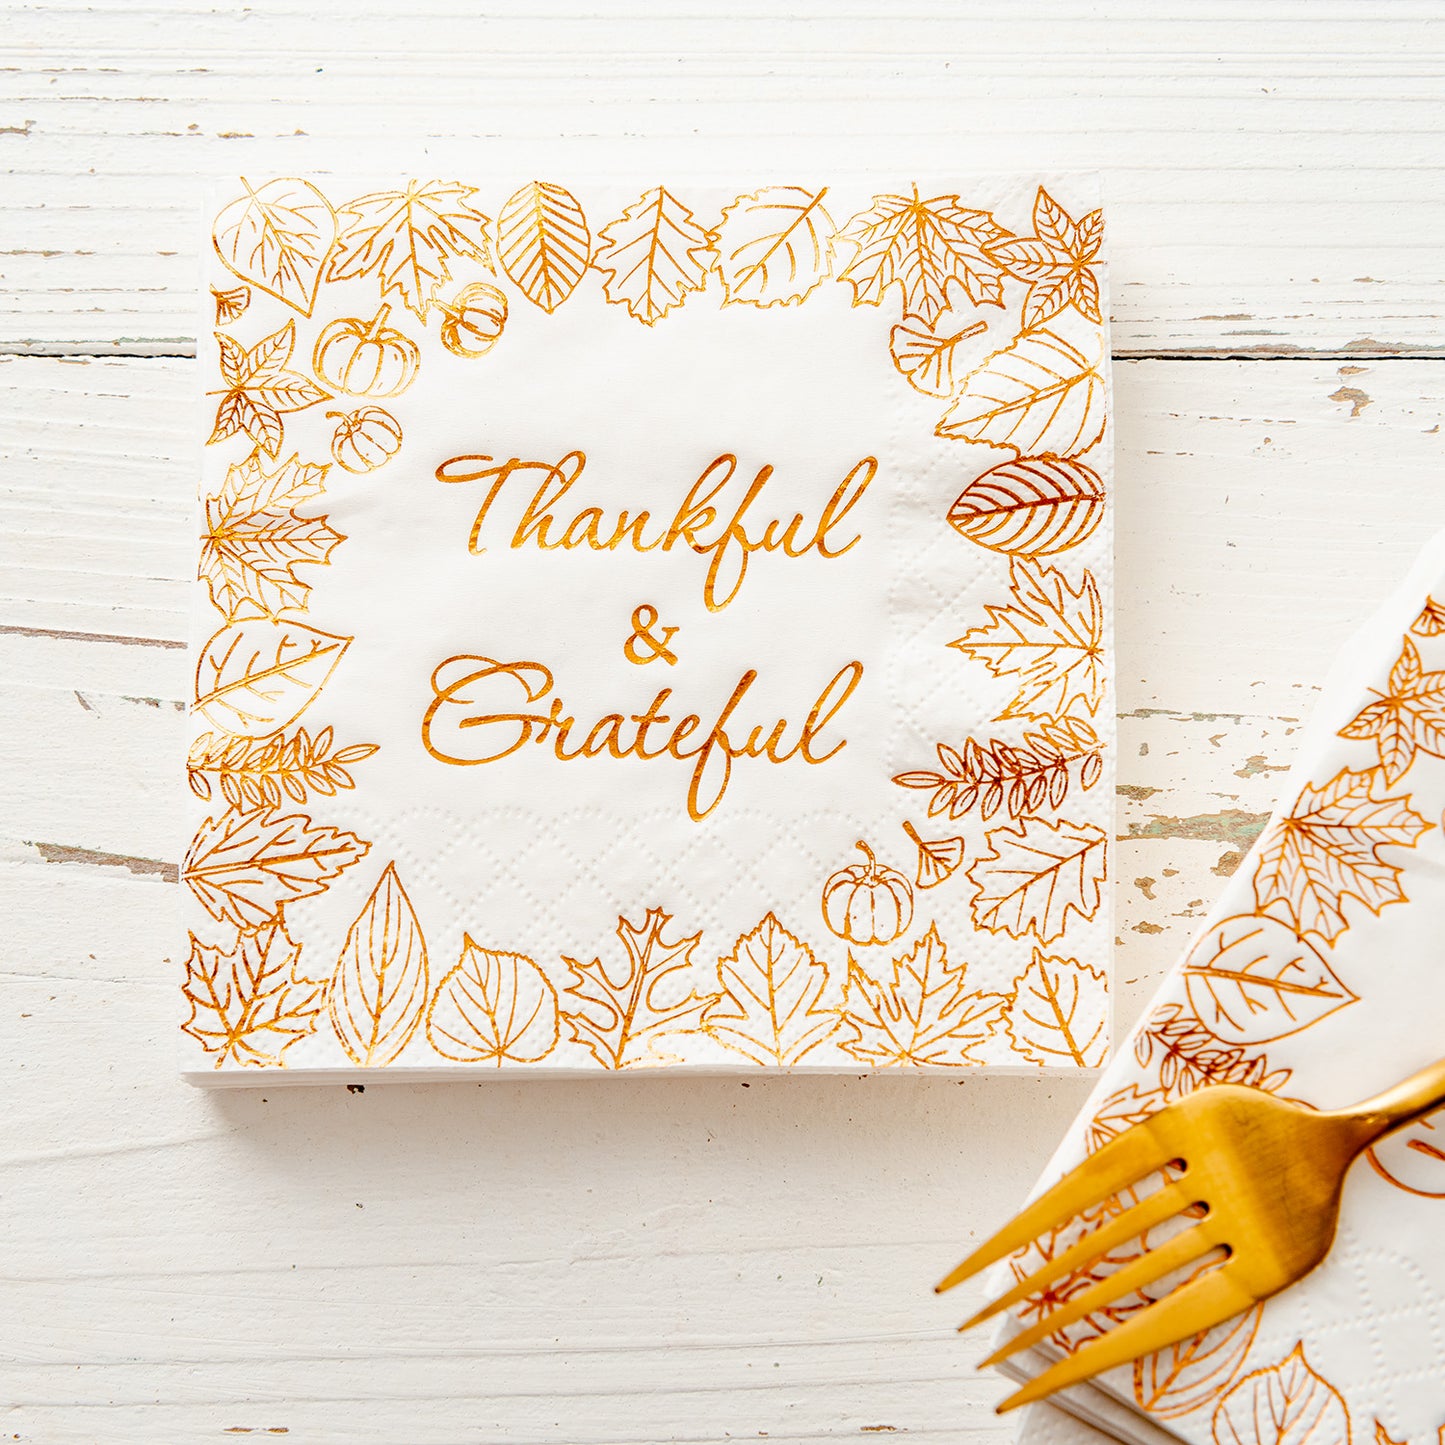 Crisky Thanksgiving Disposable Napkins Paper for Autumn Thanksgiving Dinner Party Decorations, Thankful and Grateful in Orange Foil, 50 Pcs, 3-Ply